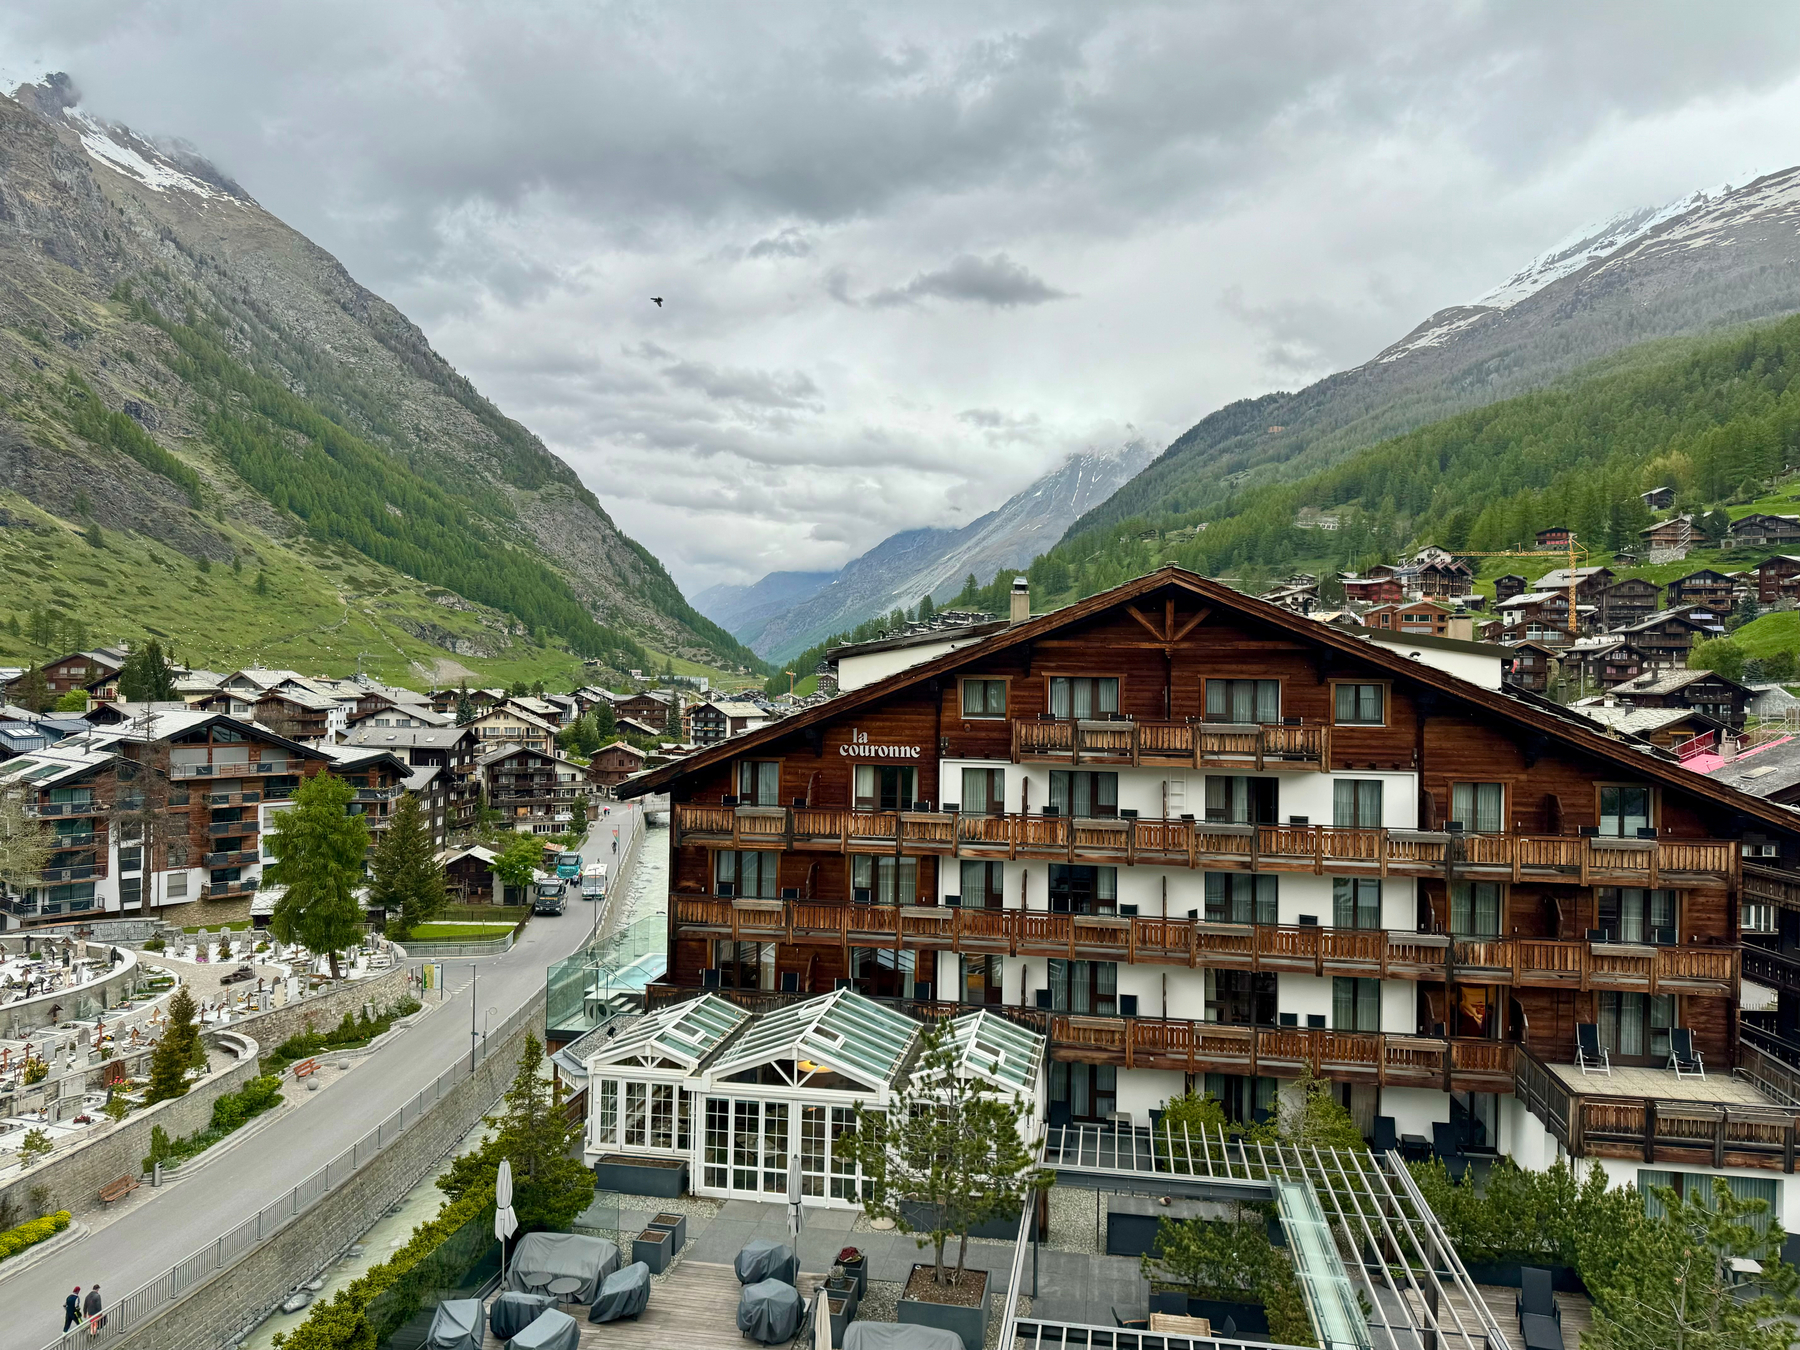 Alpine village with chalet-style buildings nestled between green mountain slopes under a cloudy sky.